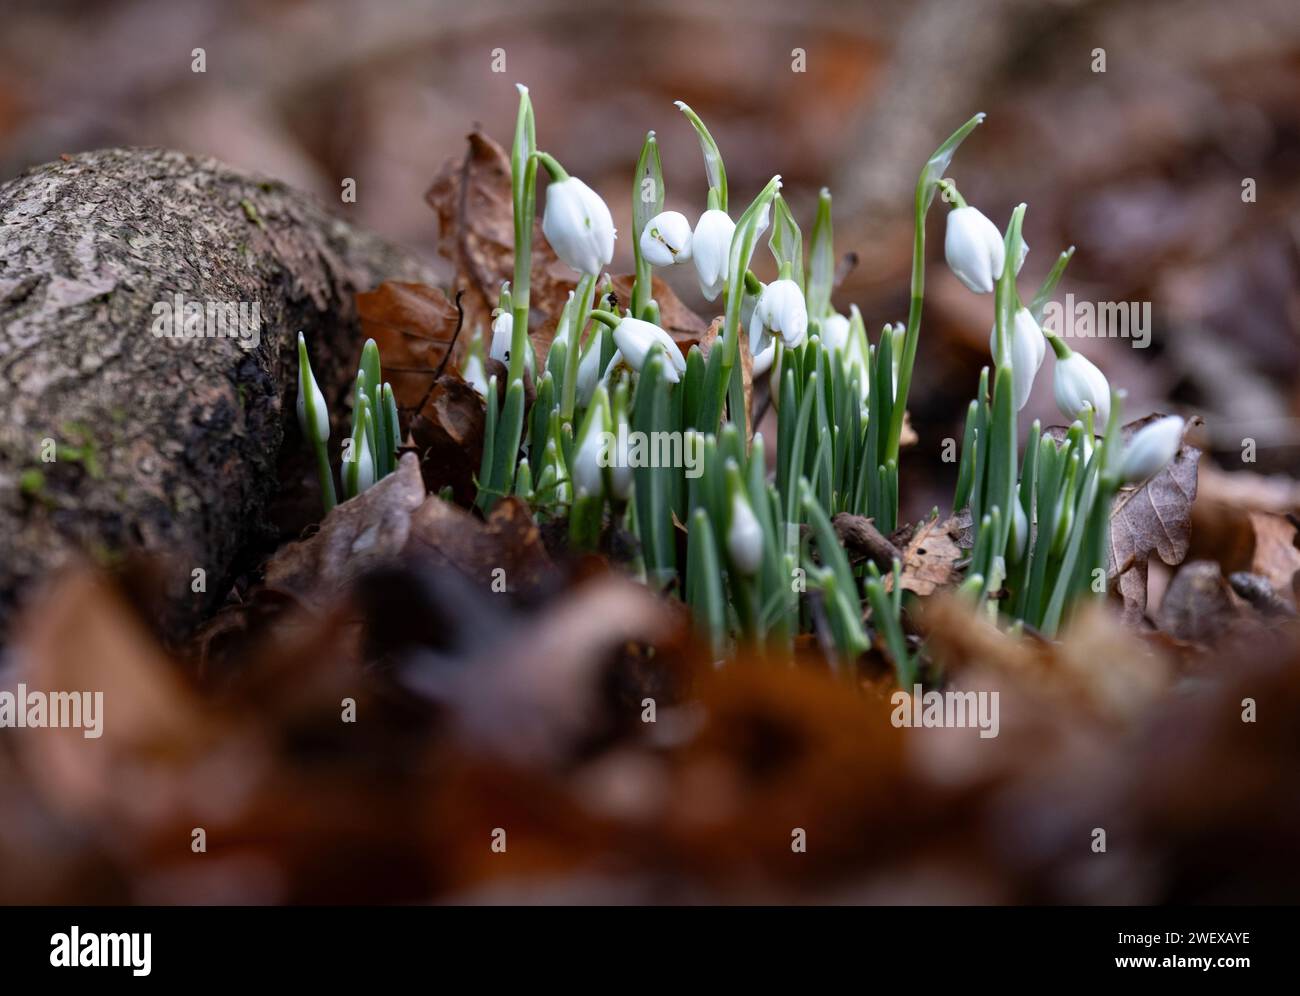 The first crop of Snowdrop flowers in bloom during winter in woodland in Worcestershire, England. Stock Photo